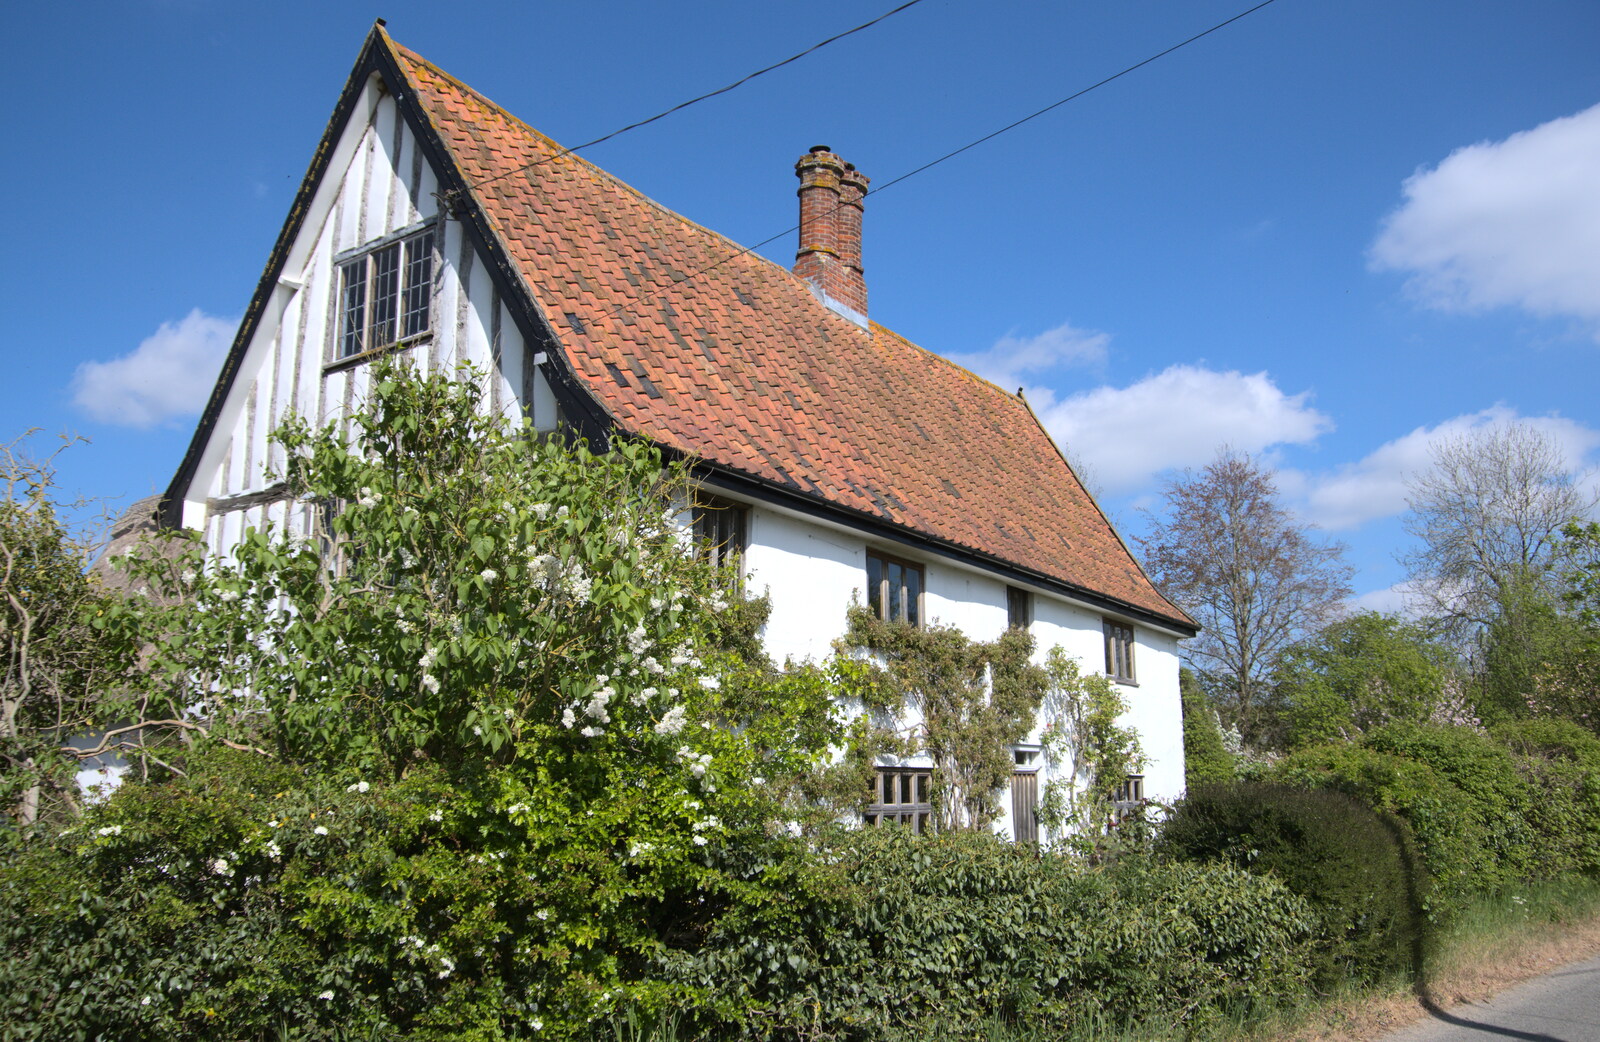 The former Doctor Vickary's house from Lost Cat and a Walk on Nick's Lane, Brome, Suffolk - 26th April 2020